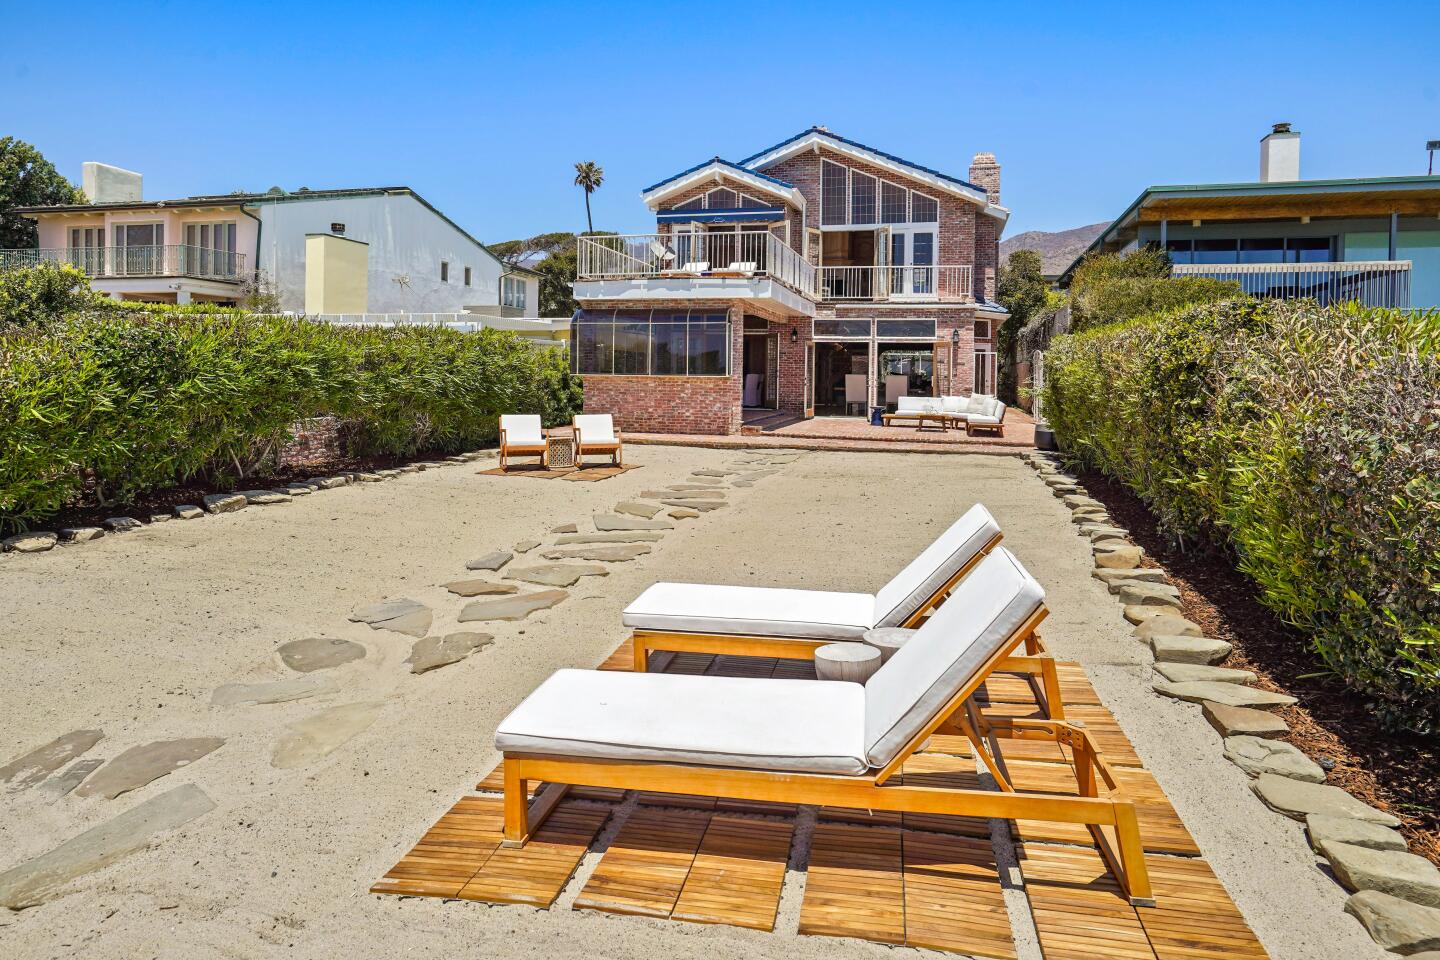 The oceanfront patio has deck chairs, a stone-covered walkway and a view of the house.